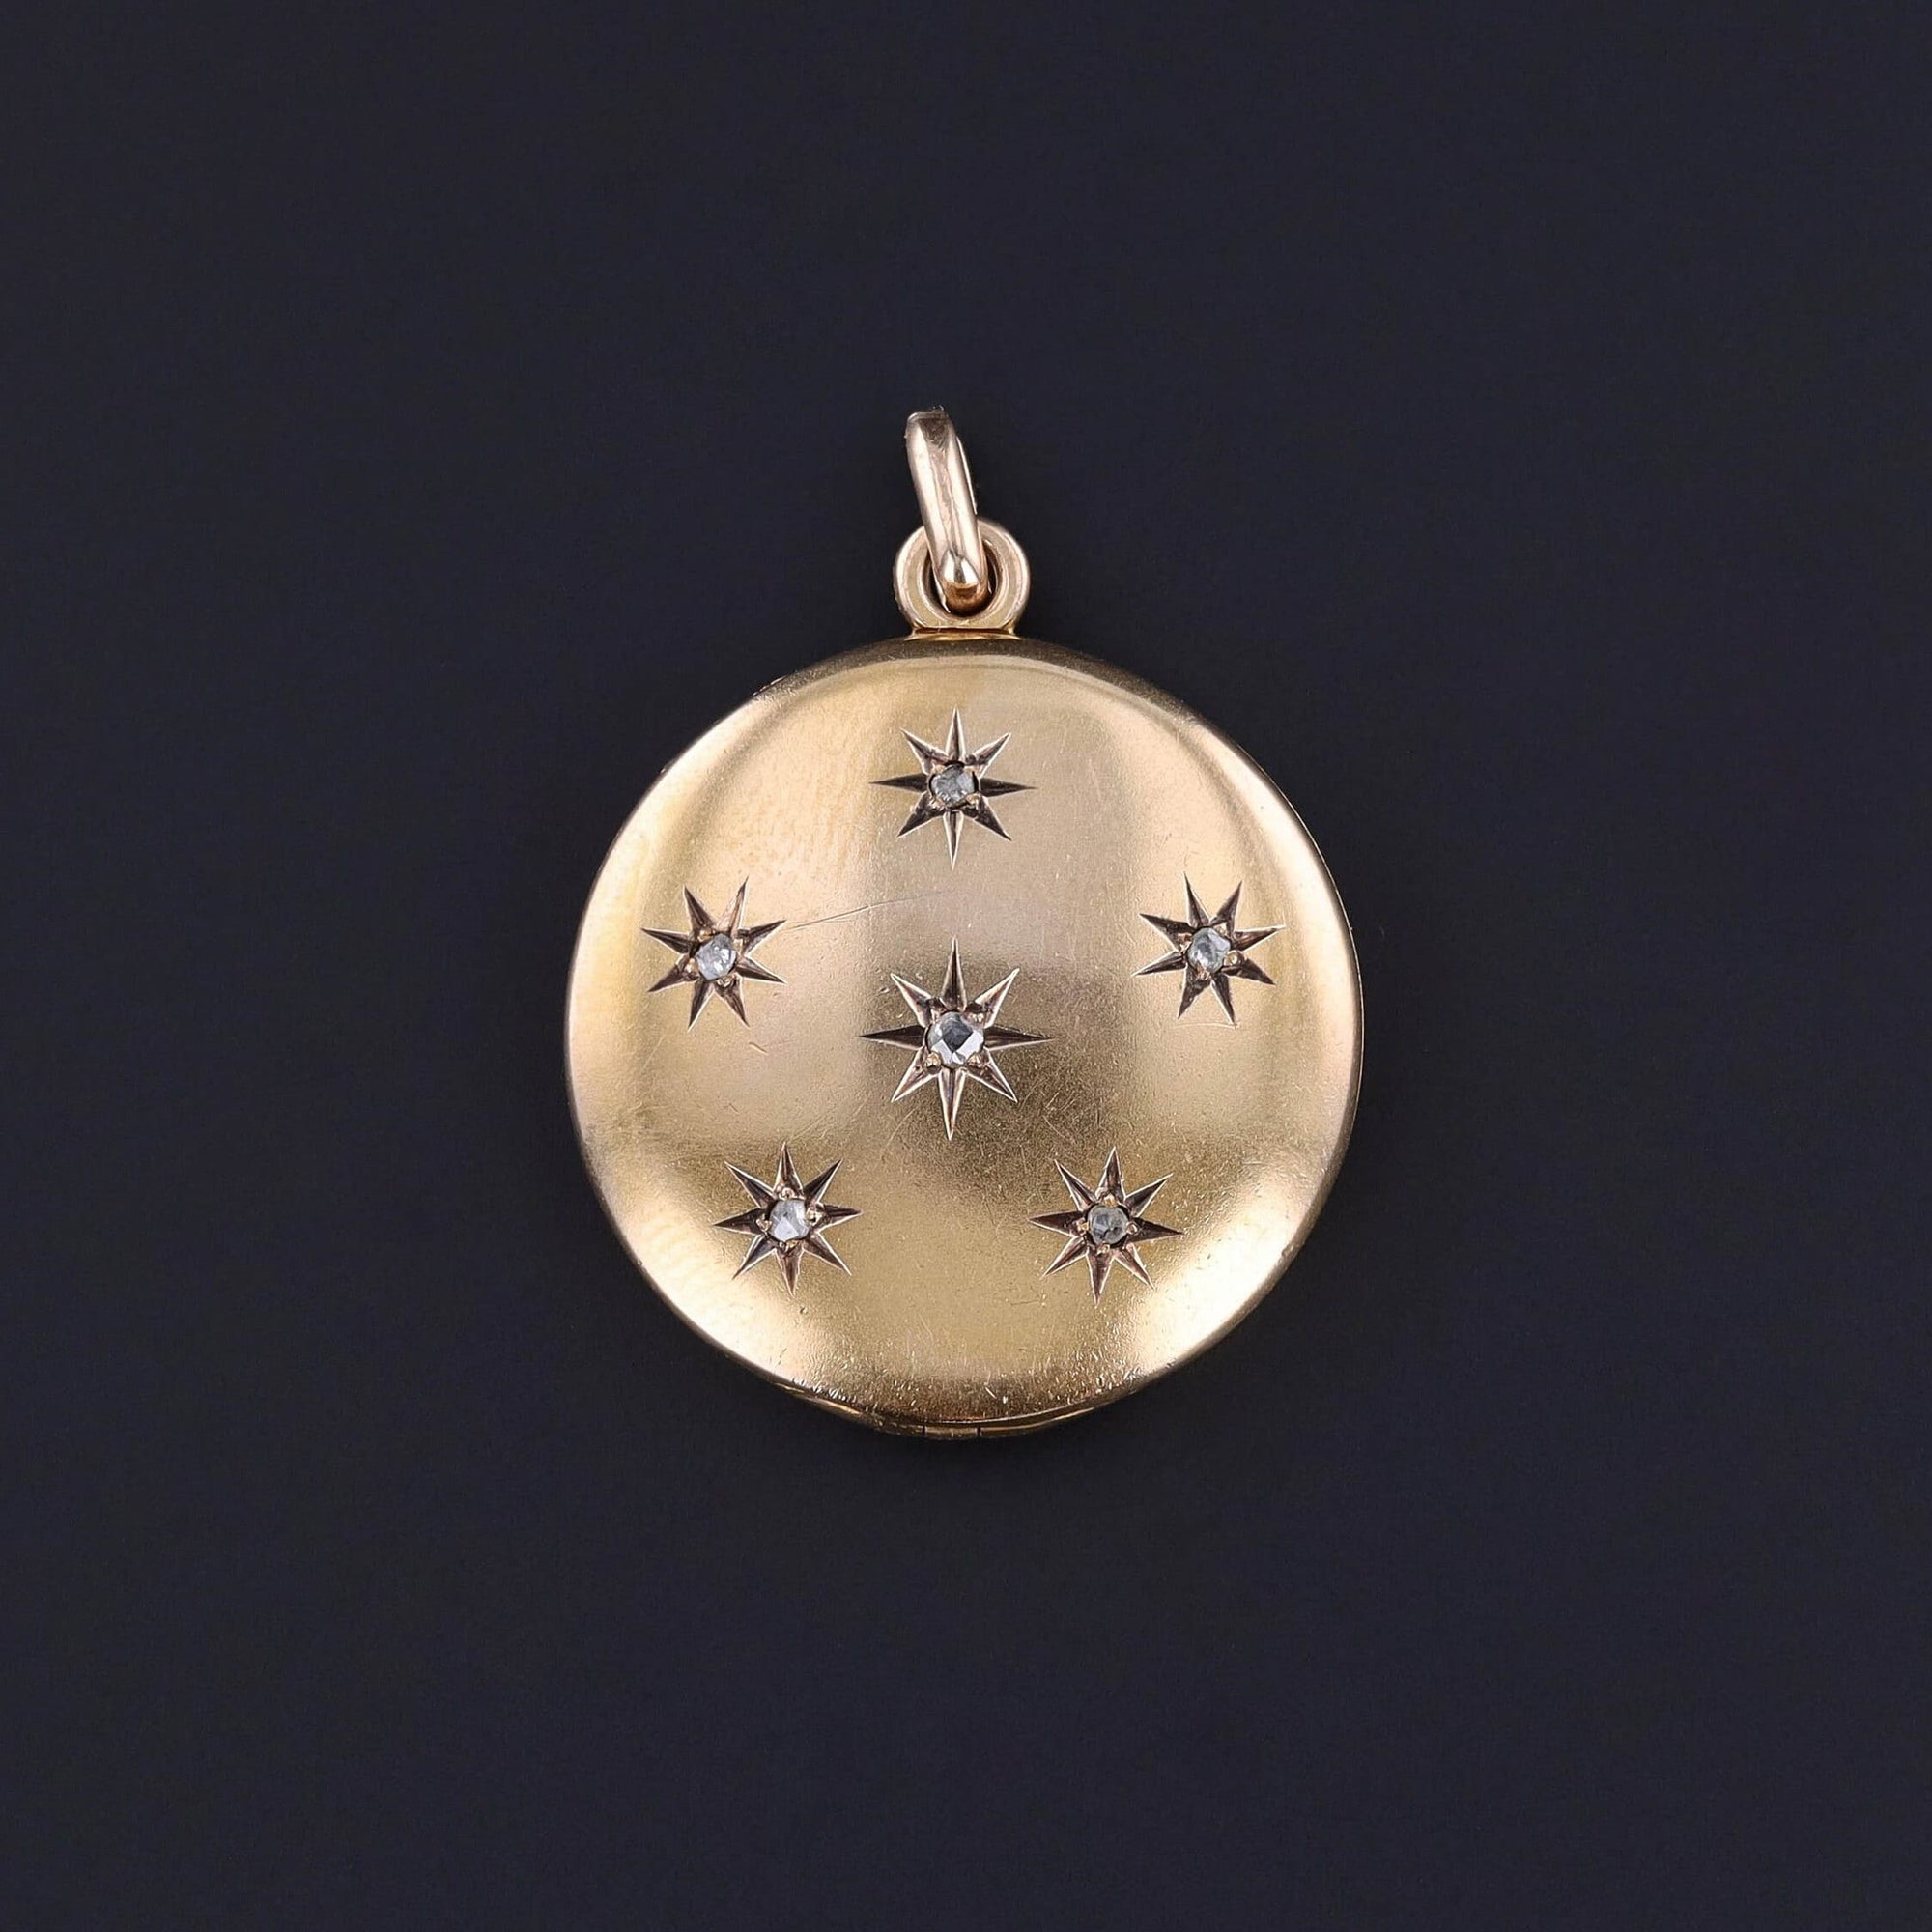 An elegant Victorian locket adorned with rose cut diamond stars. The locket opens from top to bottom and shows minimal surface wear. It is perfect for any jewelry collector or someone looking for a special keepsake to hold photos.